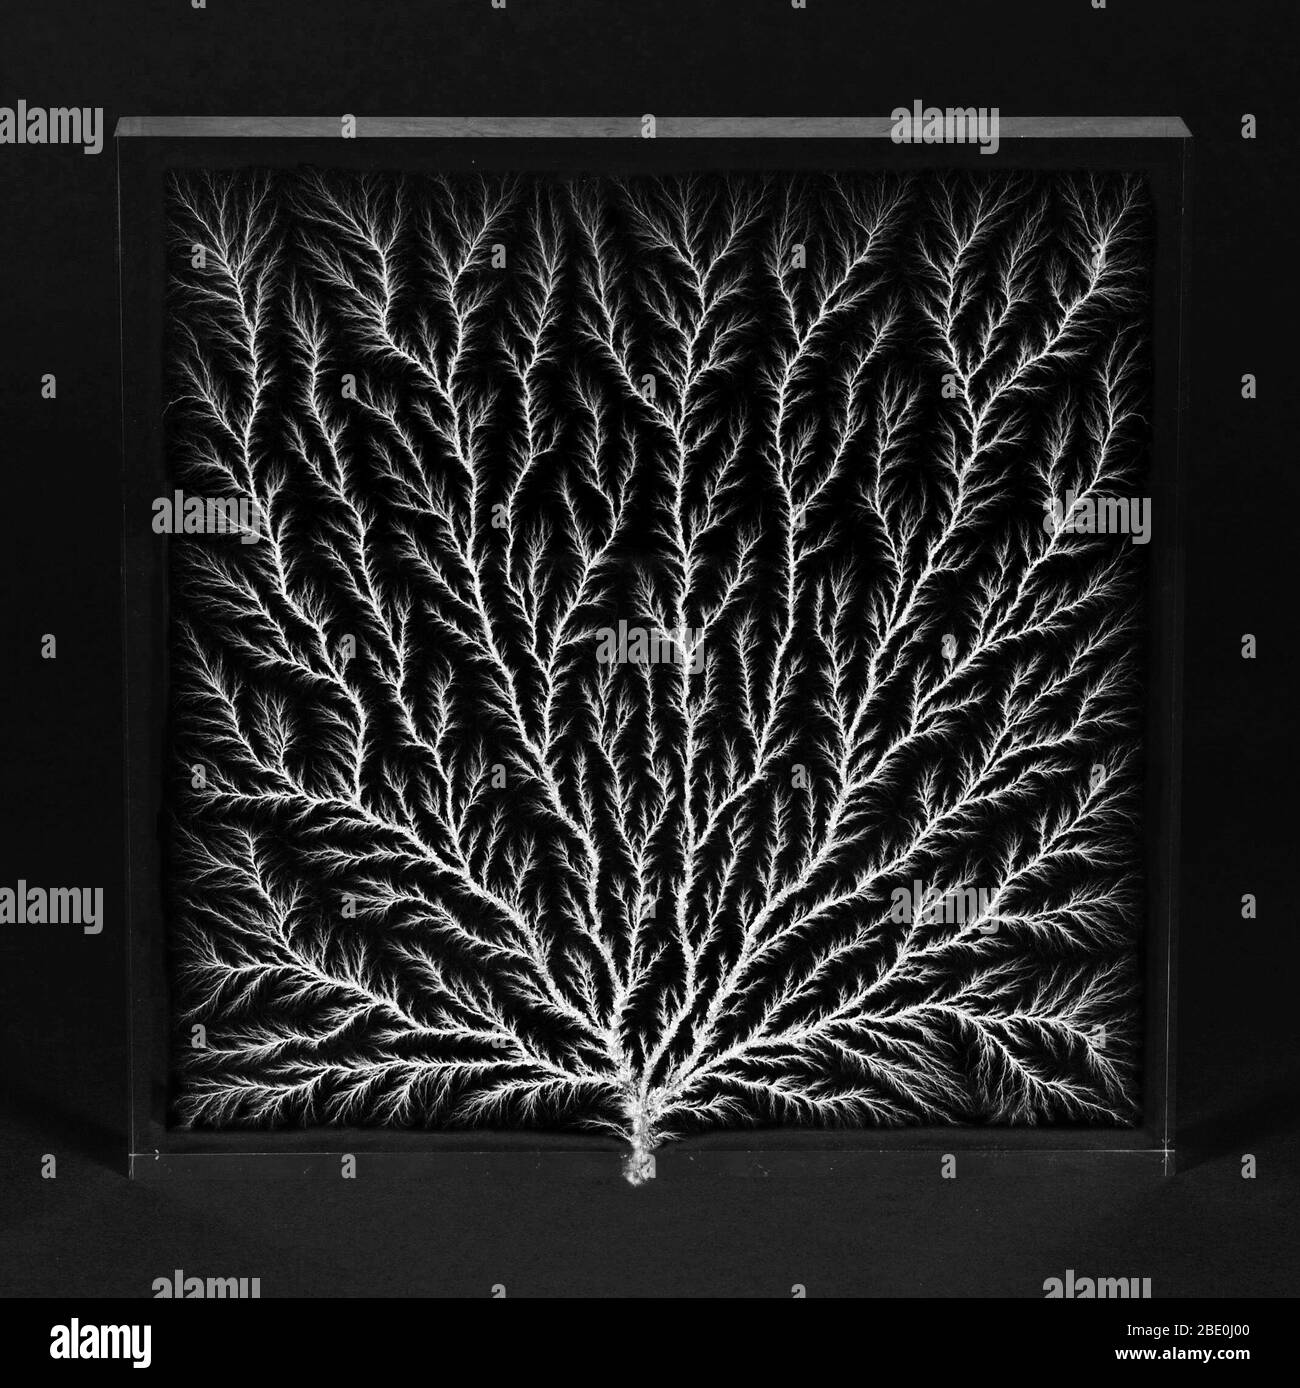 Lichtenberg figure, also known as an electron tree, beam tree, or lightning tree. Lichtenberg figures are branching electric discharges appearing on the surface or interior of an insulating material. This figure was created using an Electron Linear Accelerator (Linac), which delivered an electron beam aimed toward a thick block of acrylic. The electrons penetrate the surface of the acrylic, and rapidly decelerate as they collide with molecules inside the plastic, finally coming to rest. The pattern the electrons make in the acrylic as they rush out of the block looks like a tree, or fern-like Stock Photo